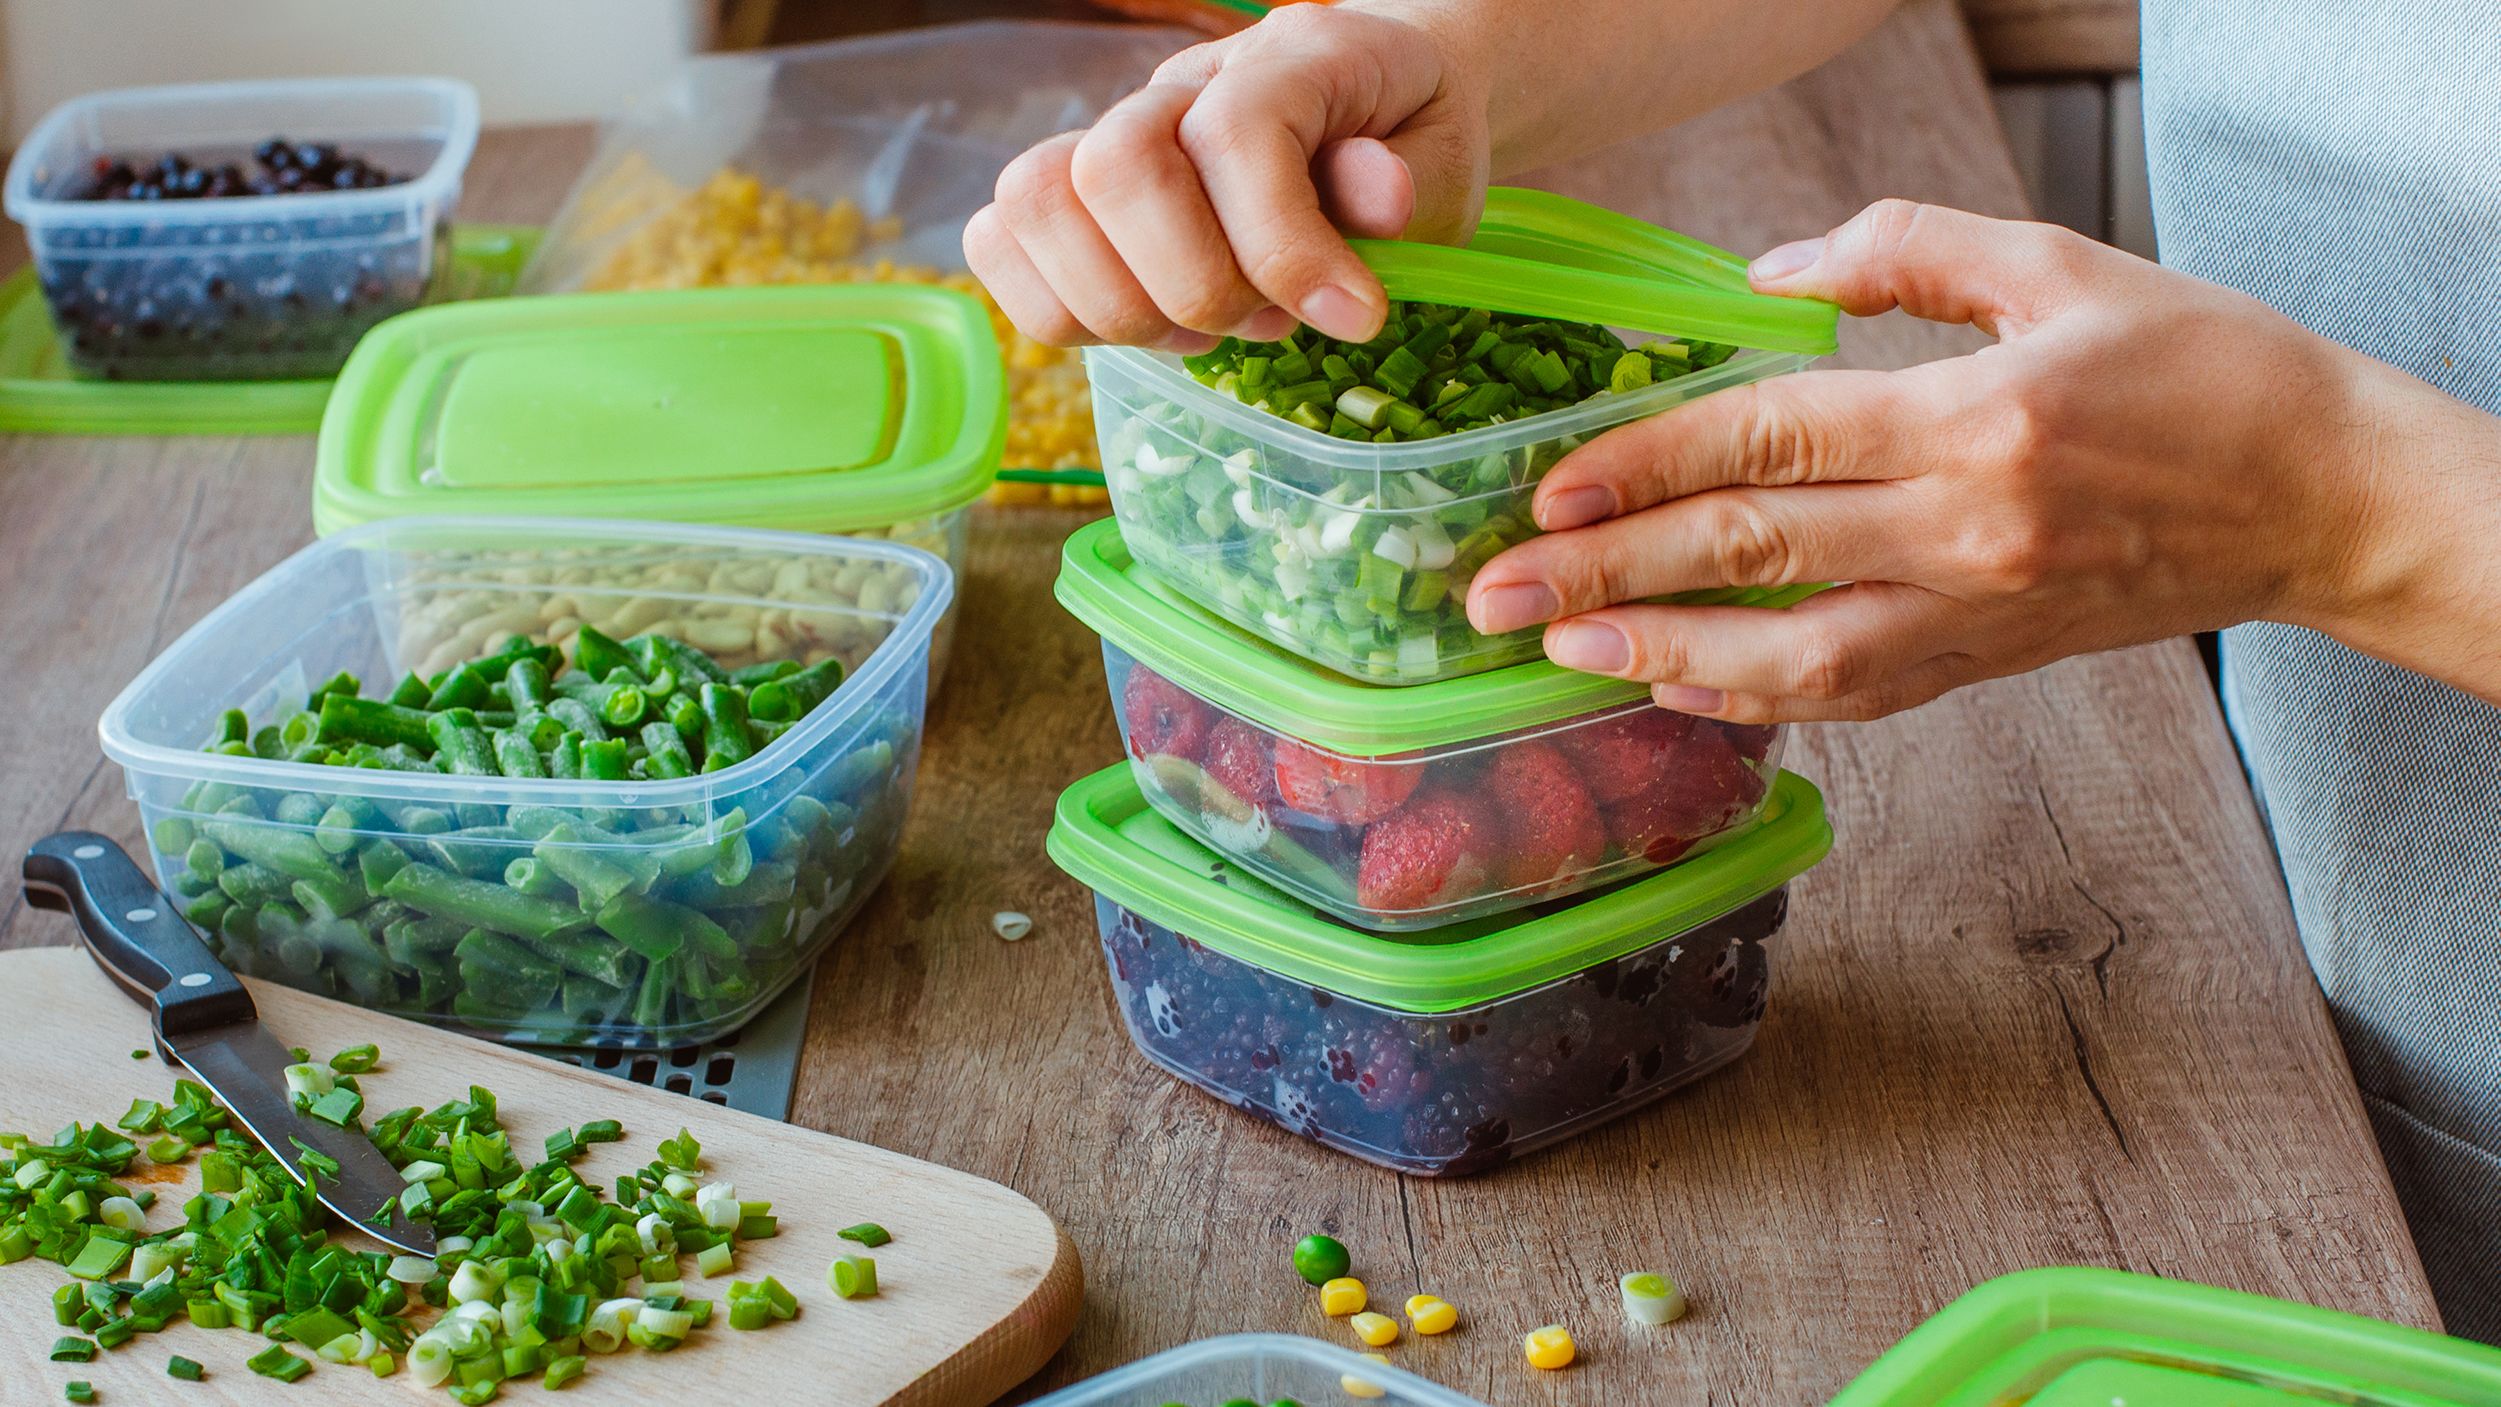 Make Meal Prep Easier With These Must-Have Kitchen Tools